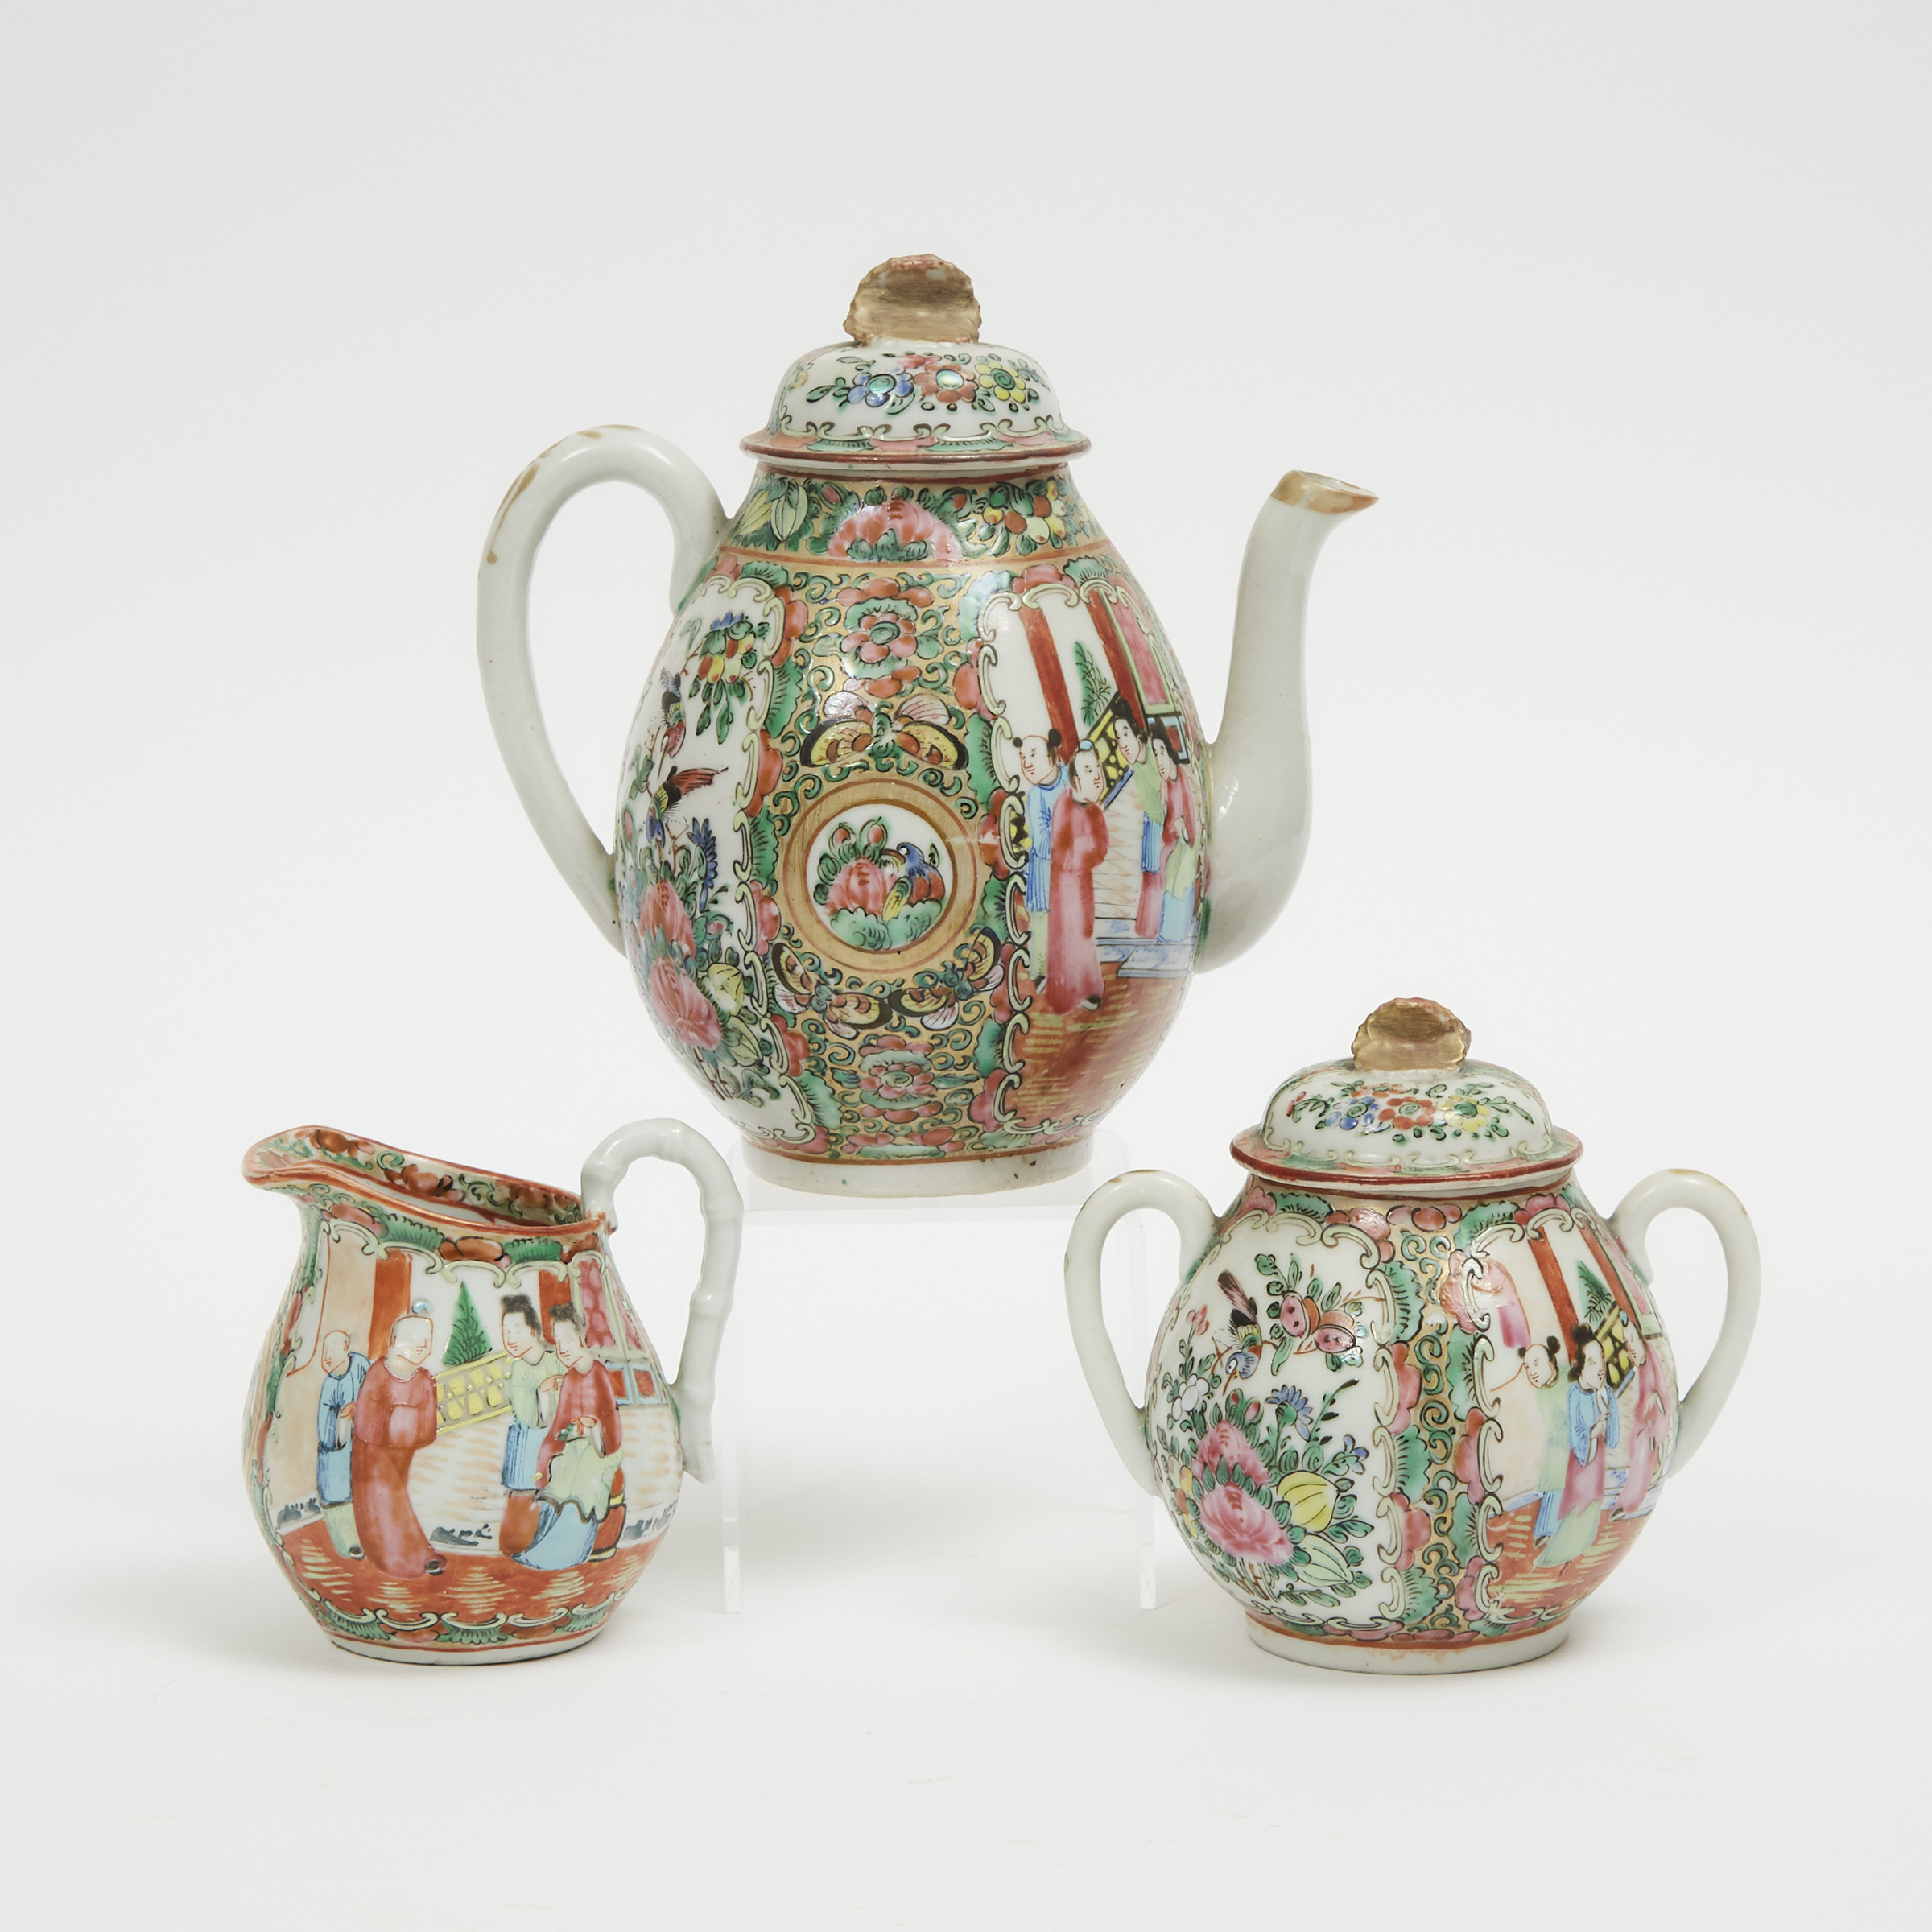 A Group of Three Canton Famille Rose Tea Wares, 19th Century